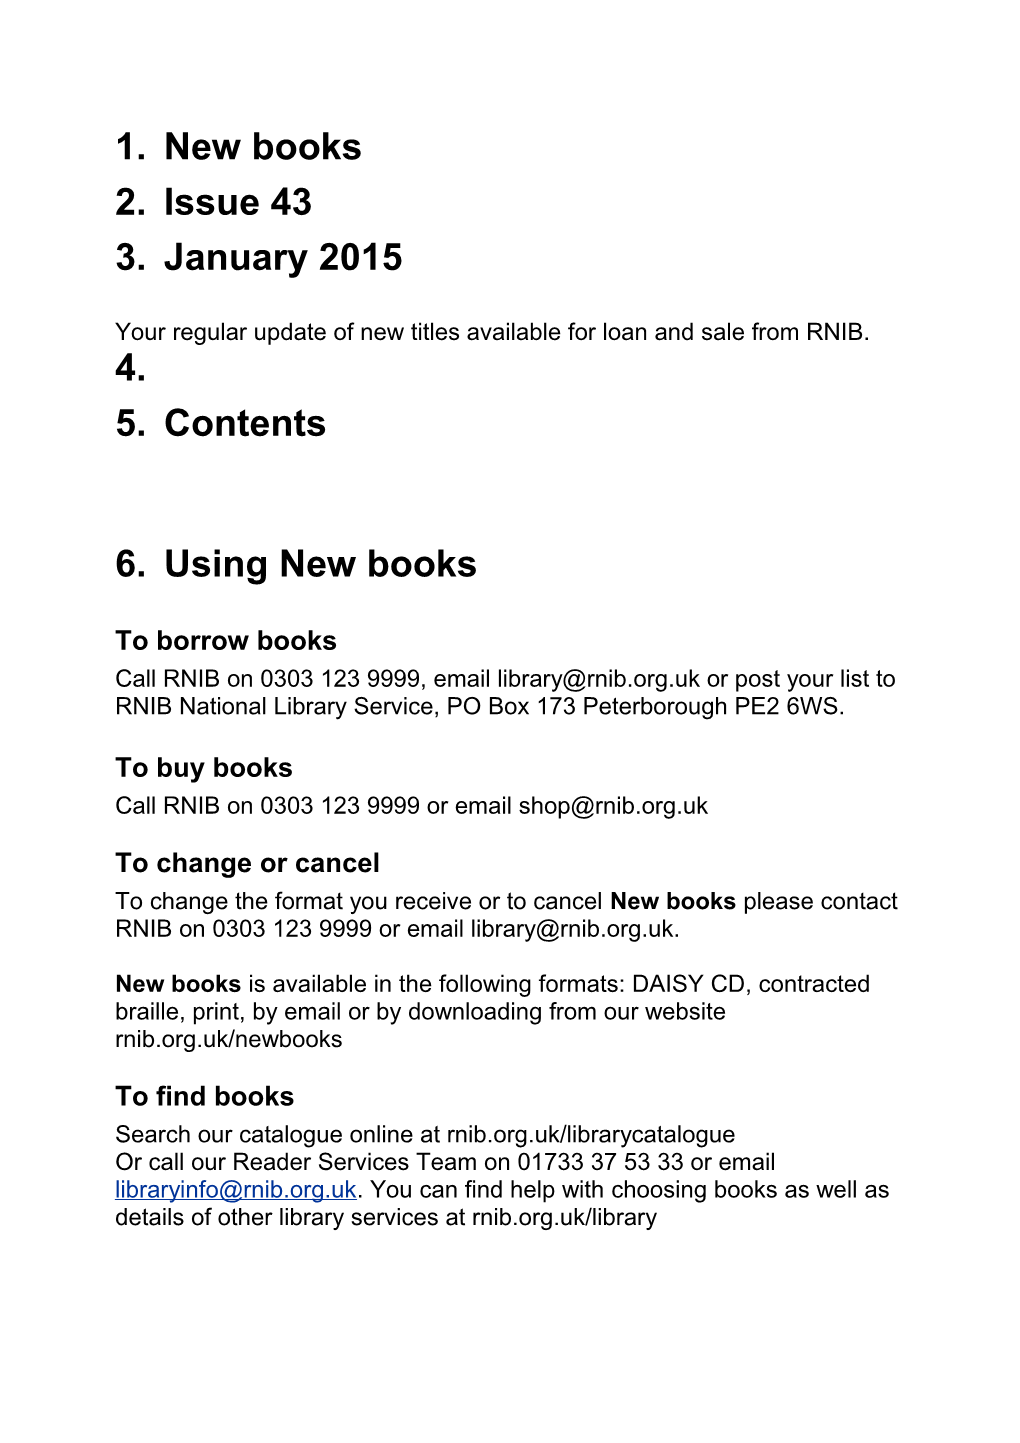 Your Regular Update of New Titles Available for Loan and Sale from RNIB s3